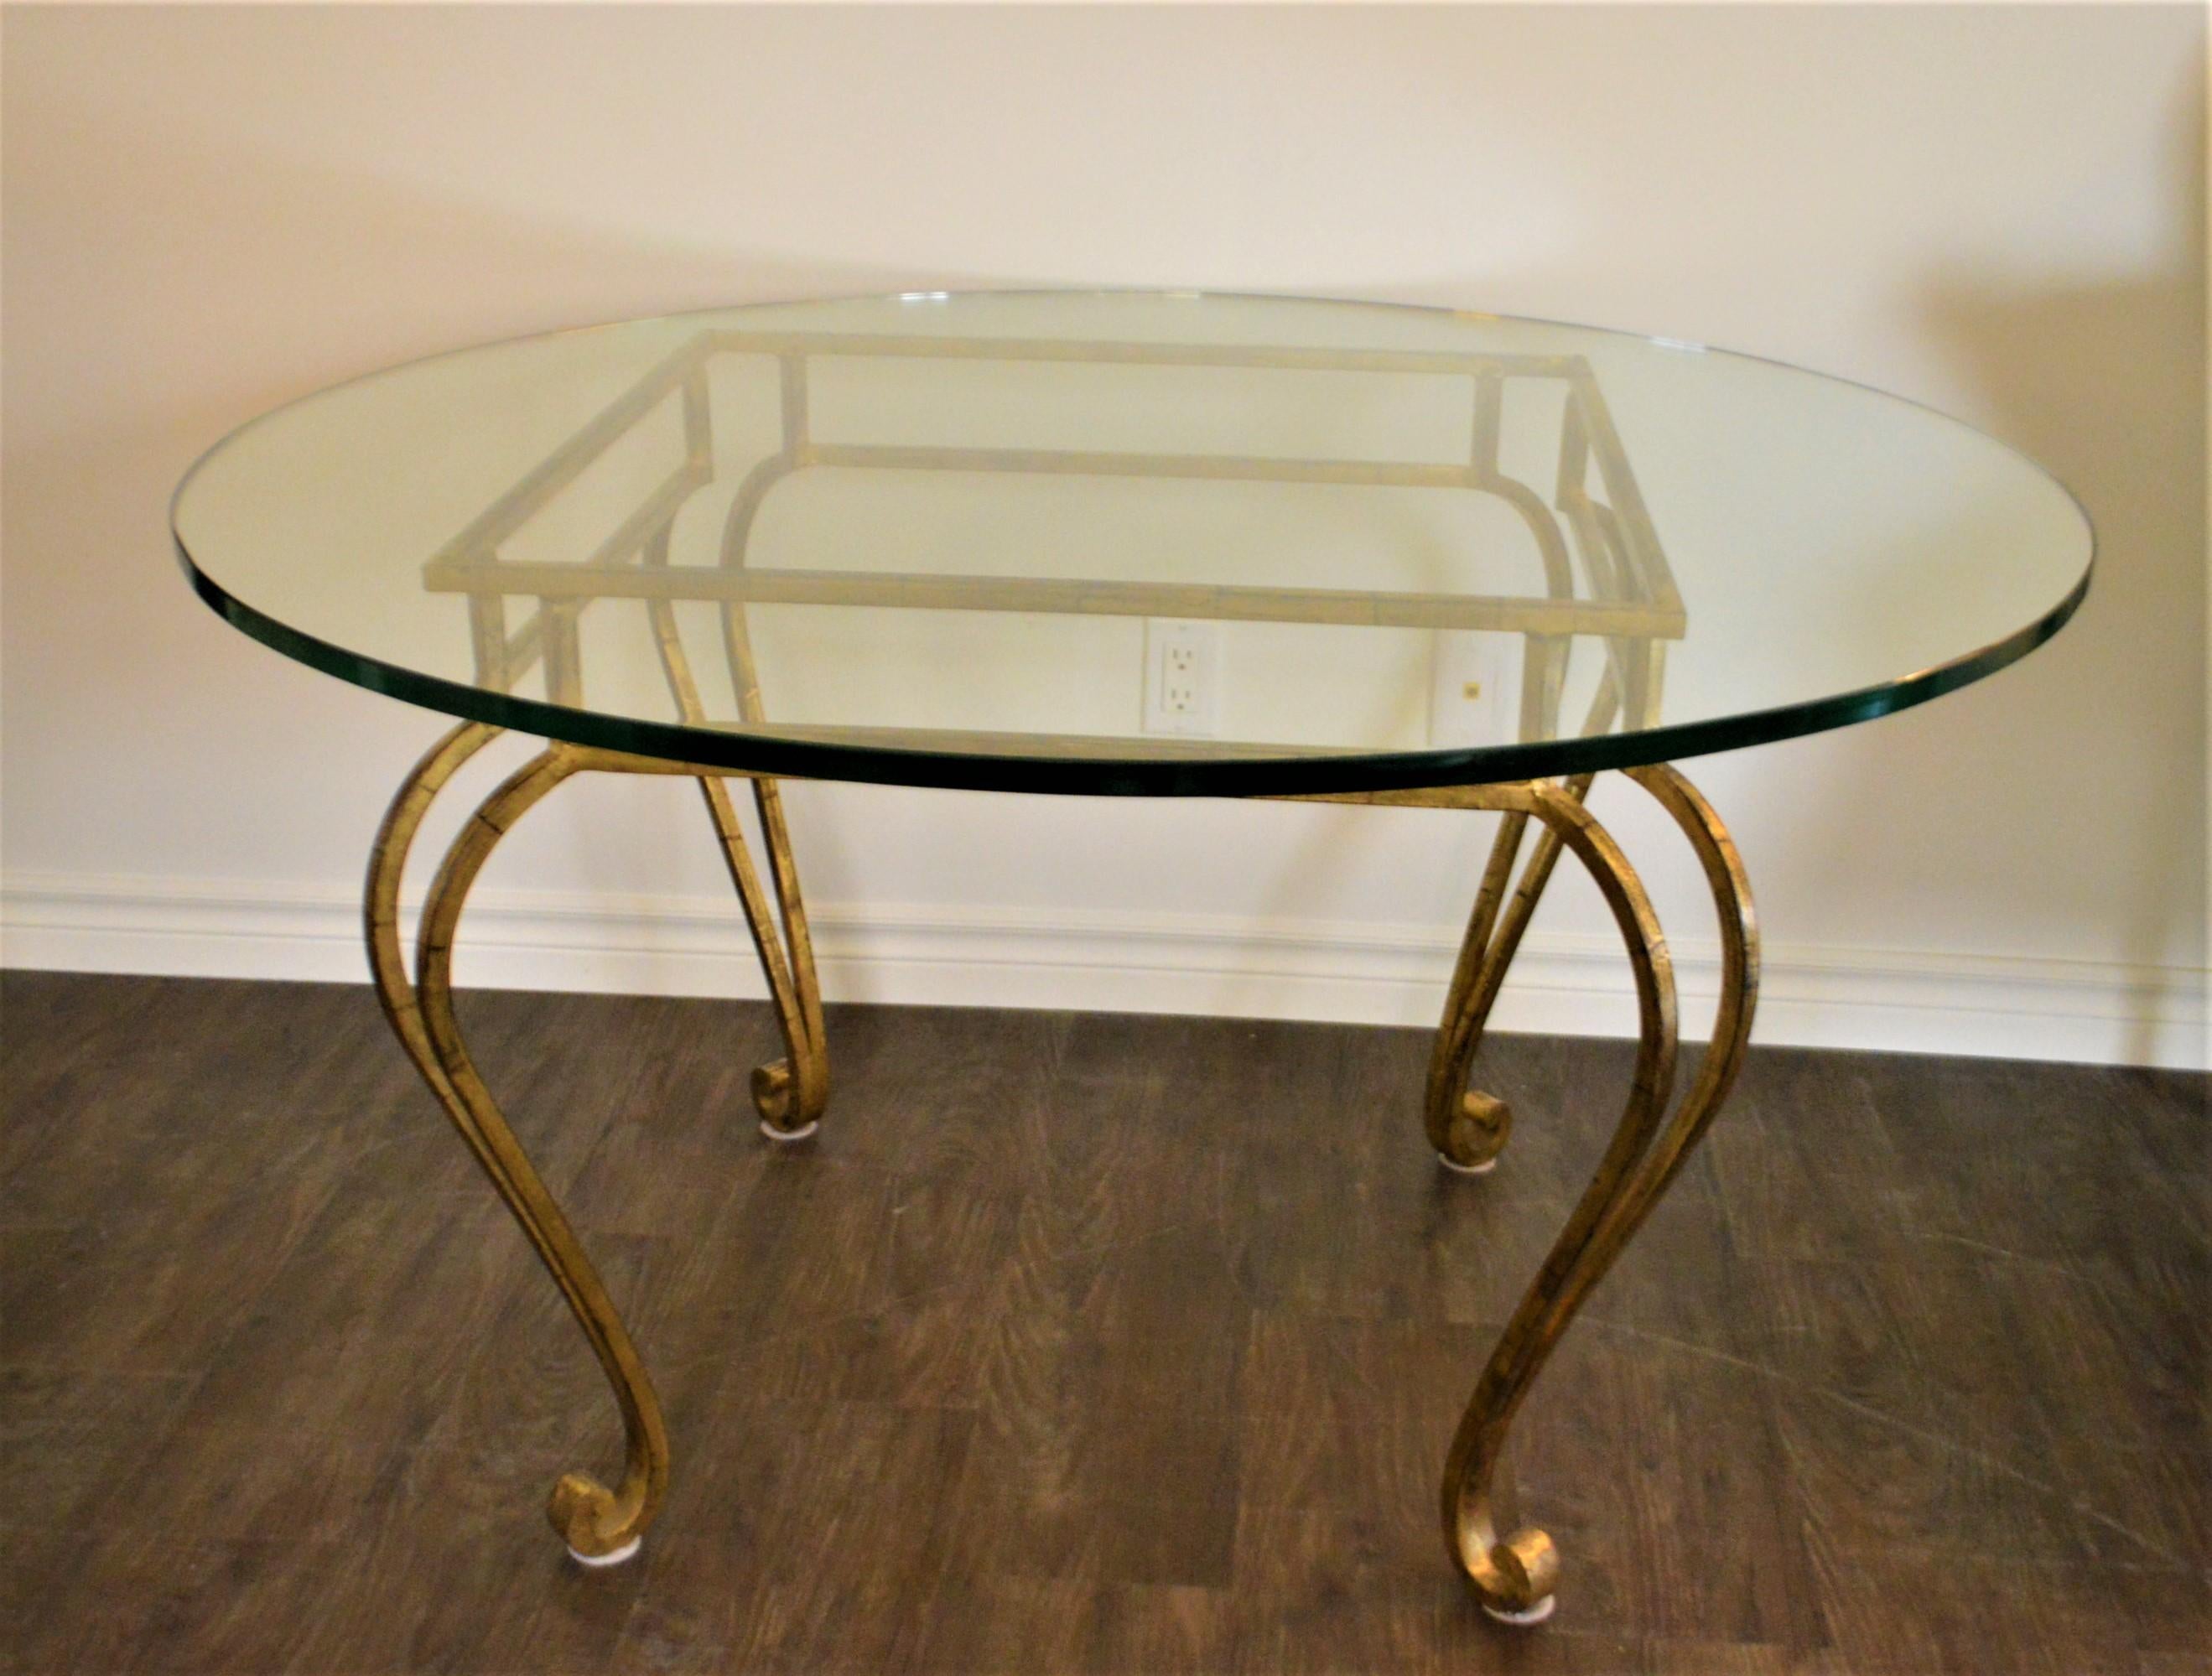 20th Century Hollywood Regency Gilded Wrought Iron Round Center Table with Thick Glass Top For Sale